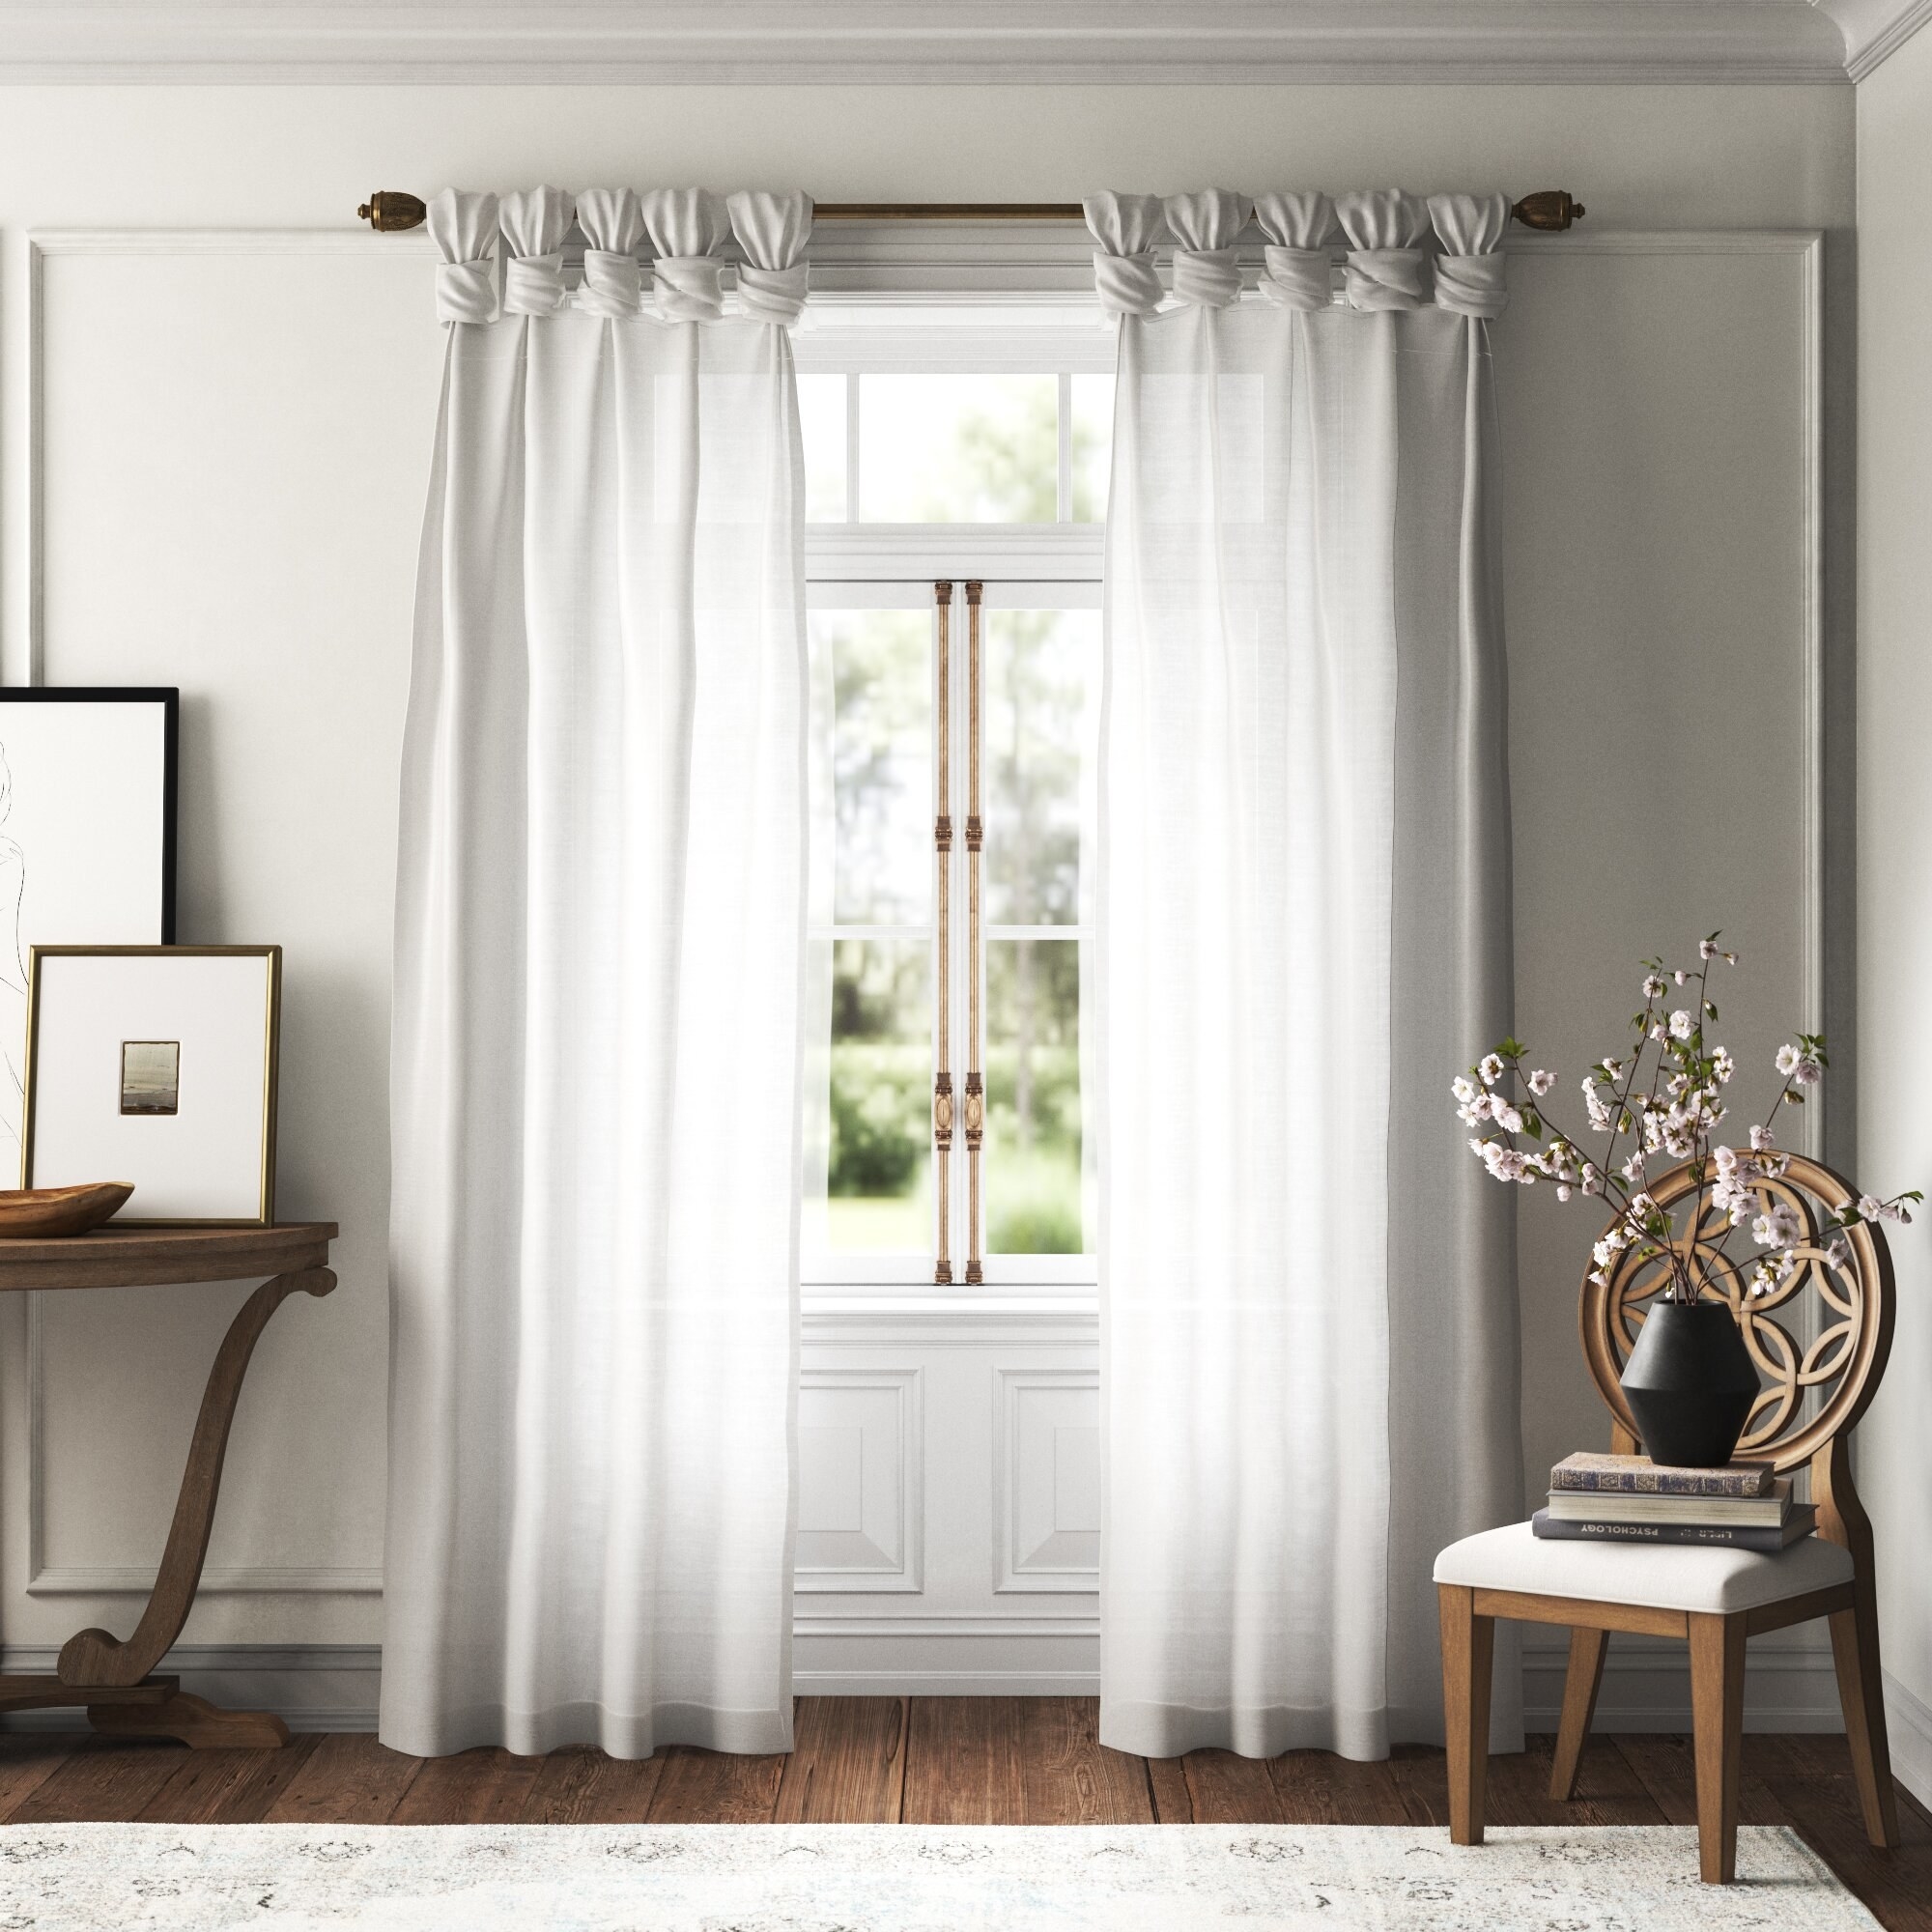 the curtains in white with knotted tops